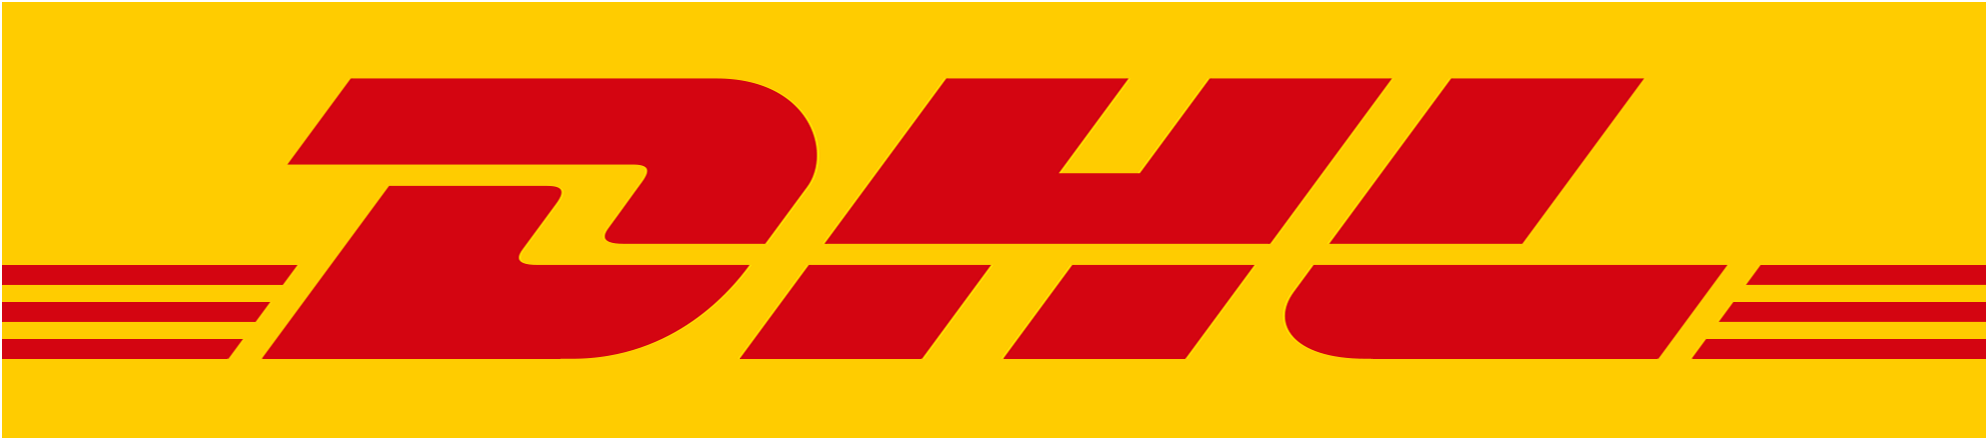 DHL Freight Spain